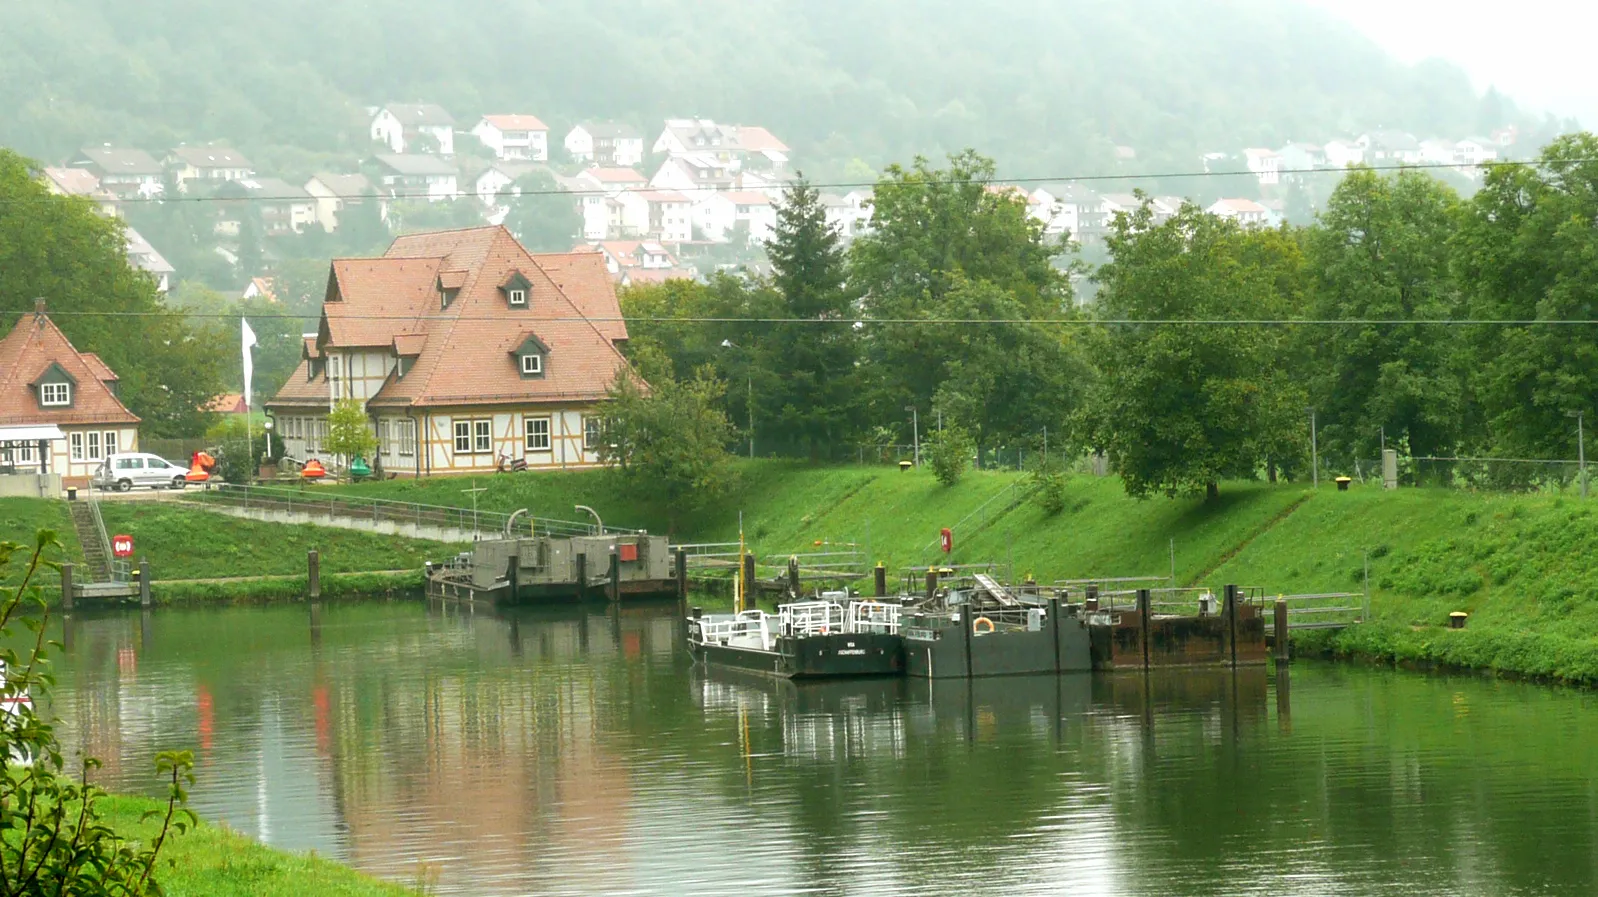 Photo showing: The village of HASLOCH and its fluvial installations on the Main river, Bavaria.